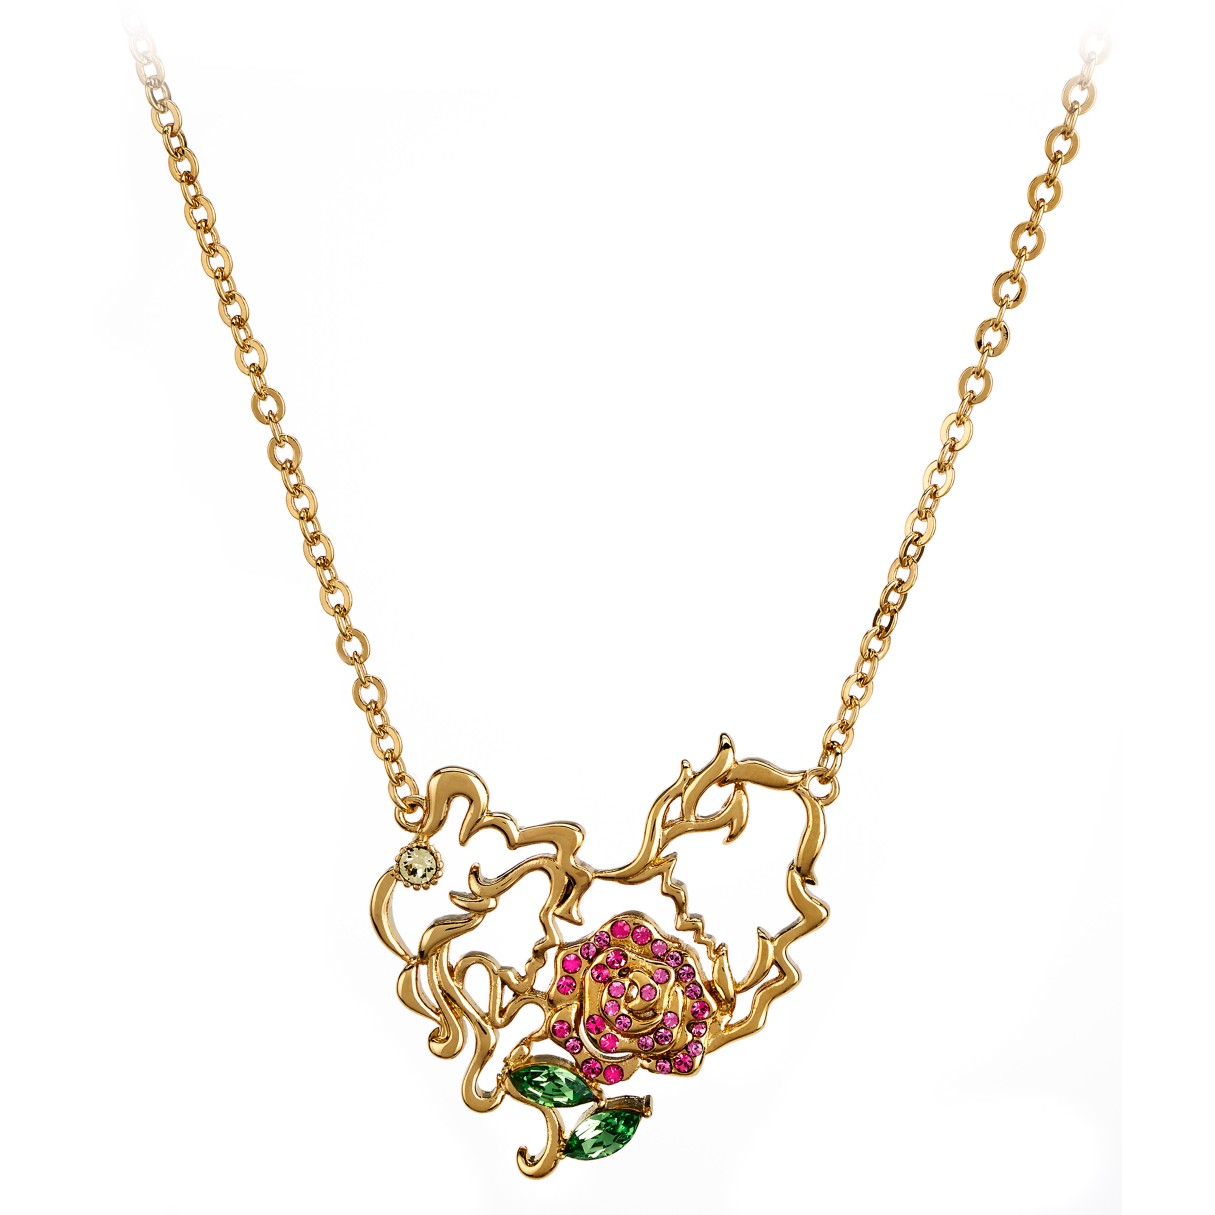 Beauty and the Beast Necklace by Arribas